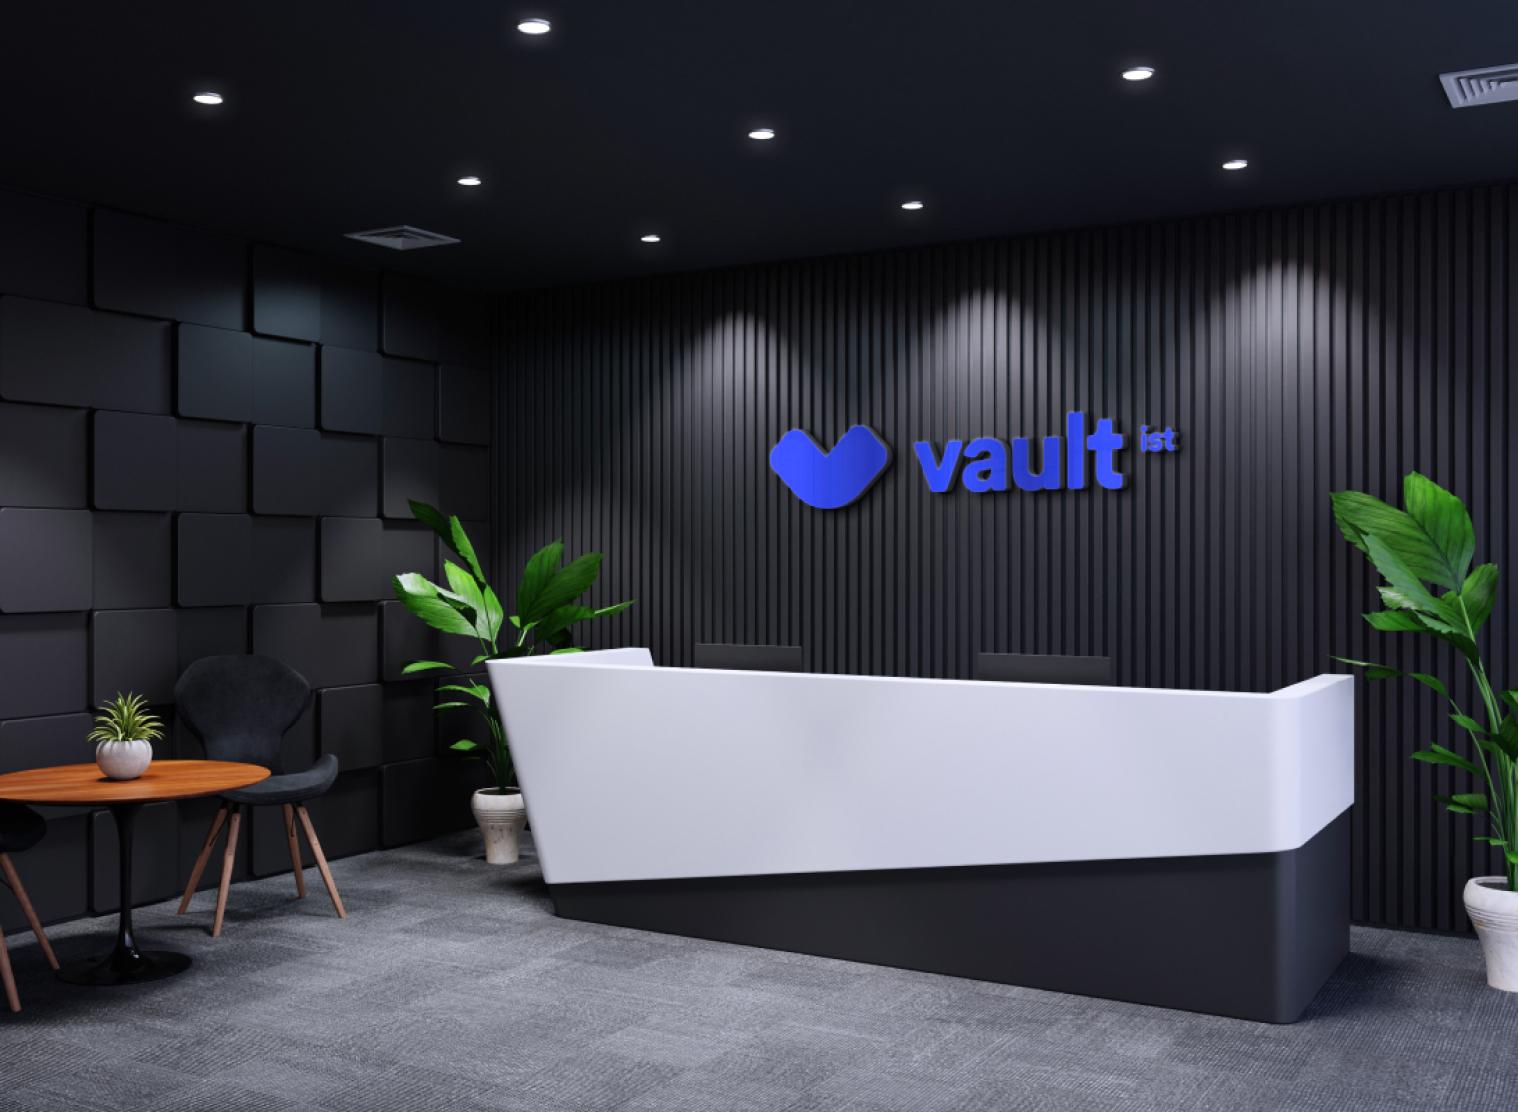 All You Want to Know About Vault